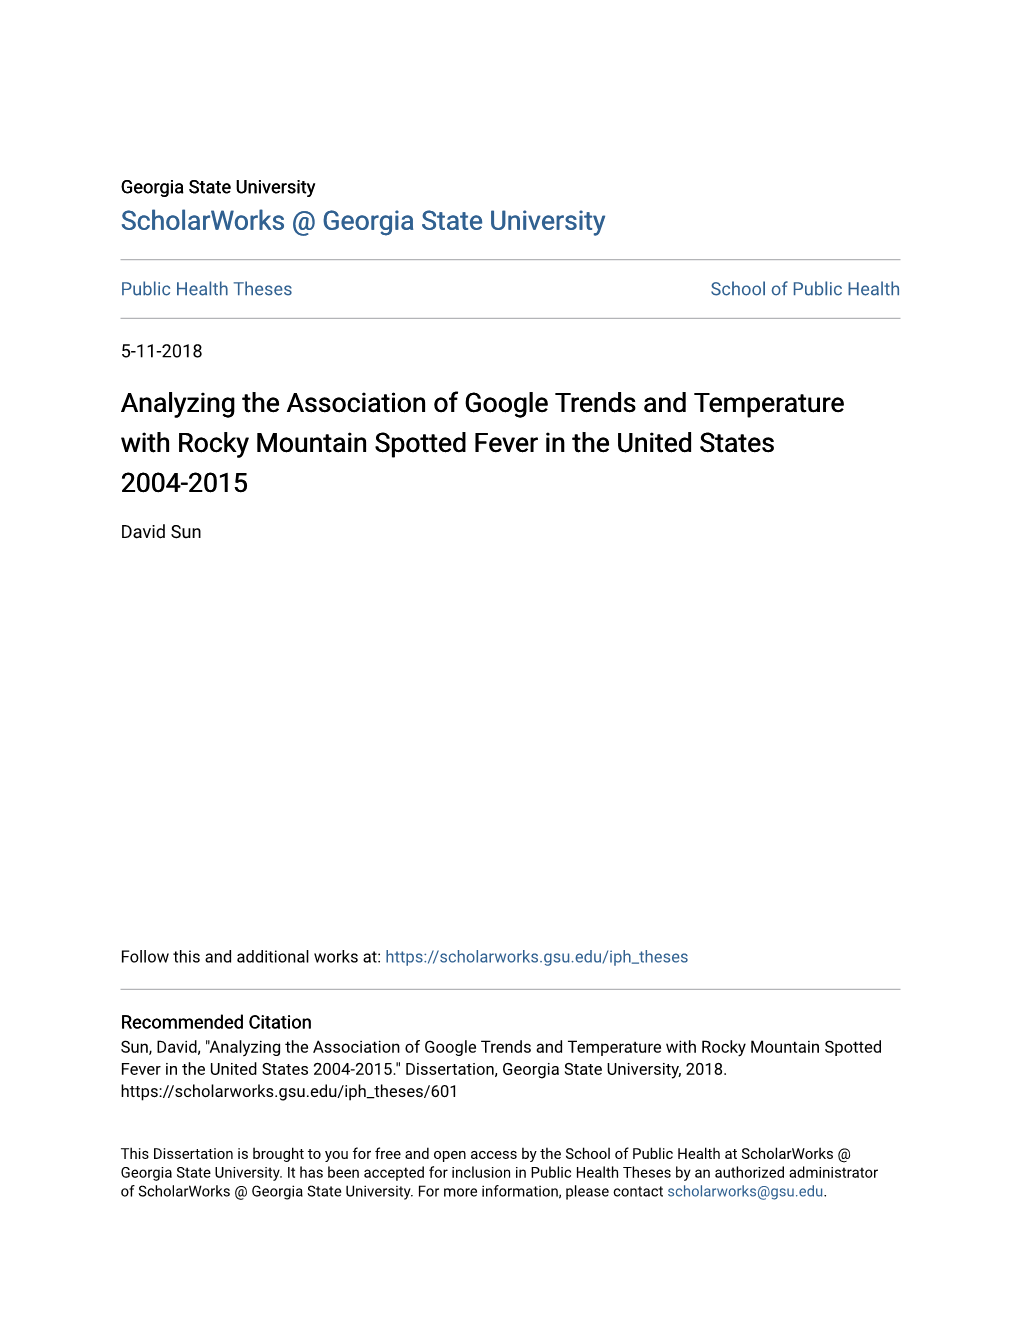 Analyzing the Association of Google Trends and Temperature with Rocky Mountain Spotted Fever in the United States 2004-2015